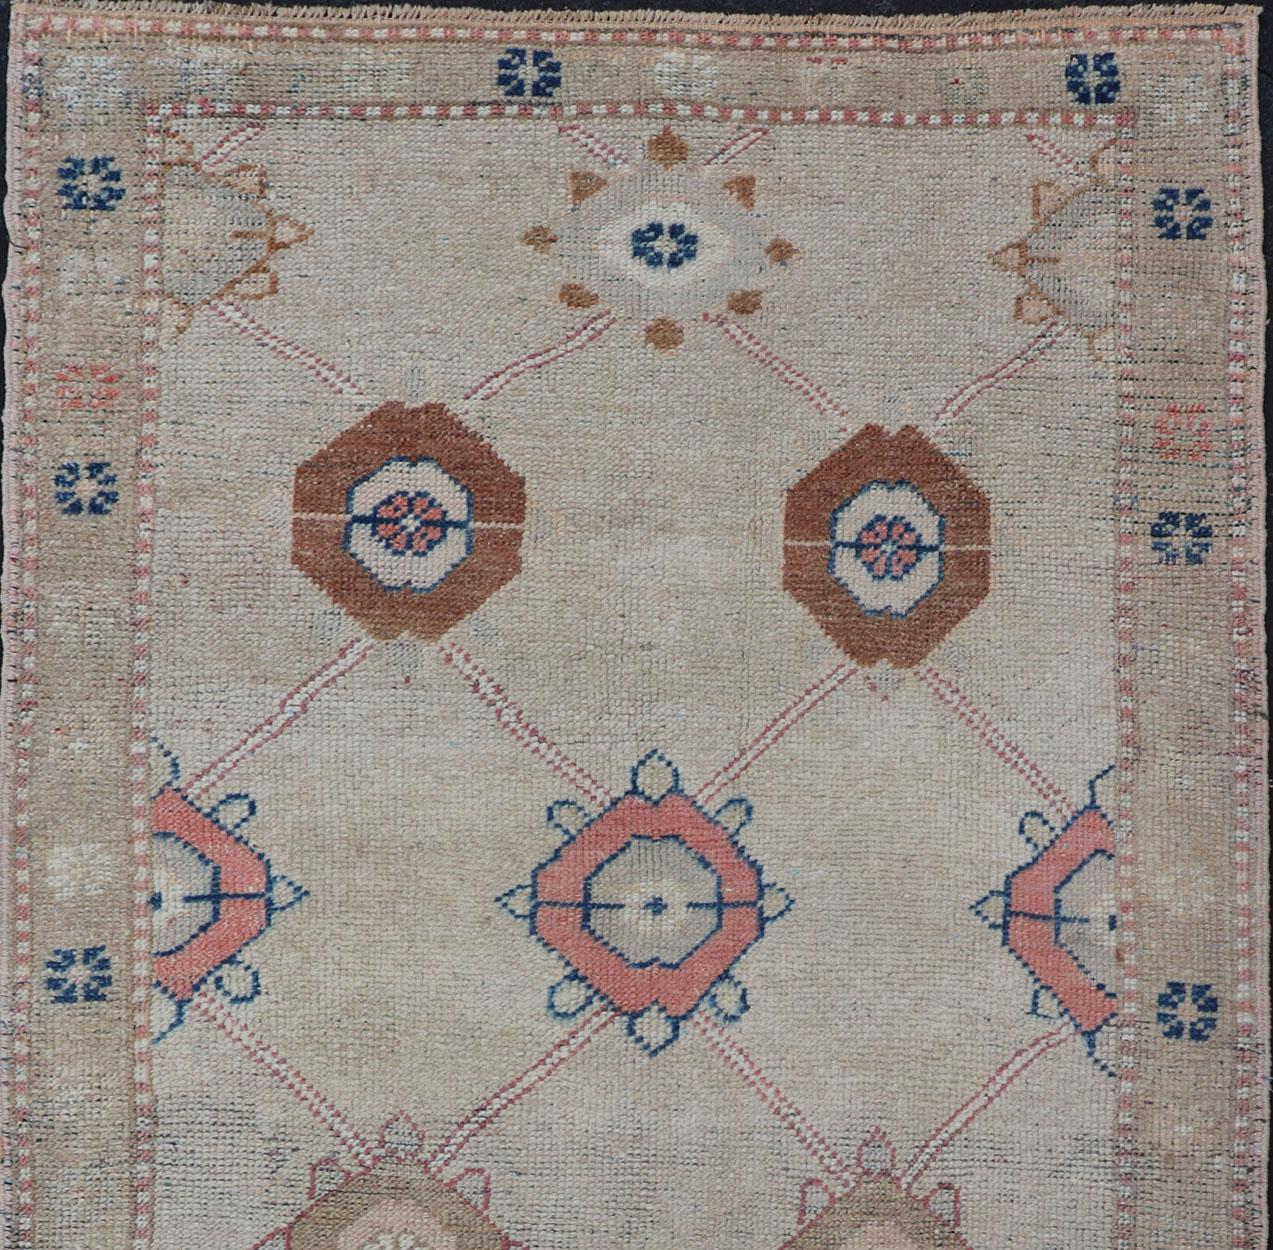 Hand-Knotted Antique Oushak with Sub-Geometric Design in Tan, Cream, Caramel, Pink & Blue 